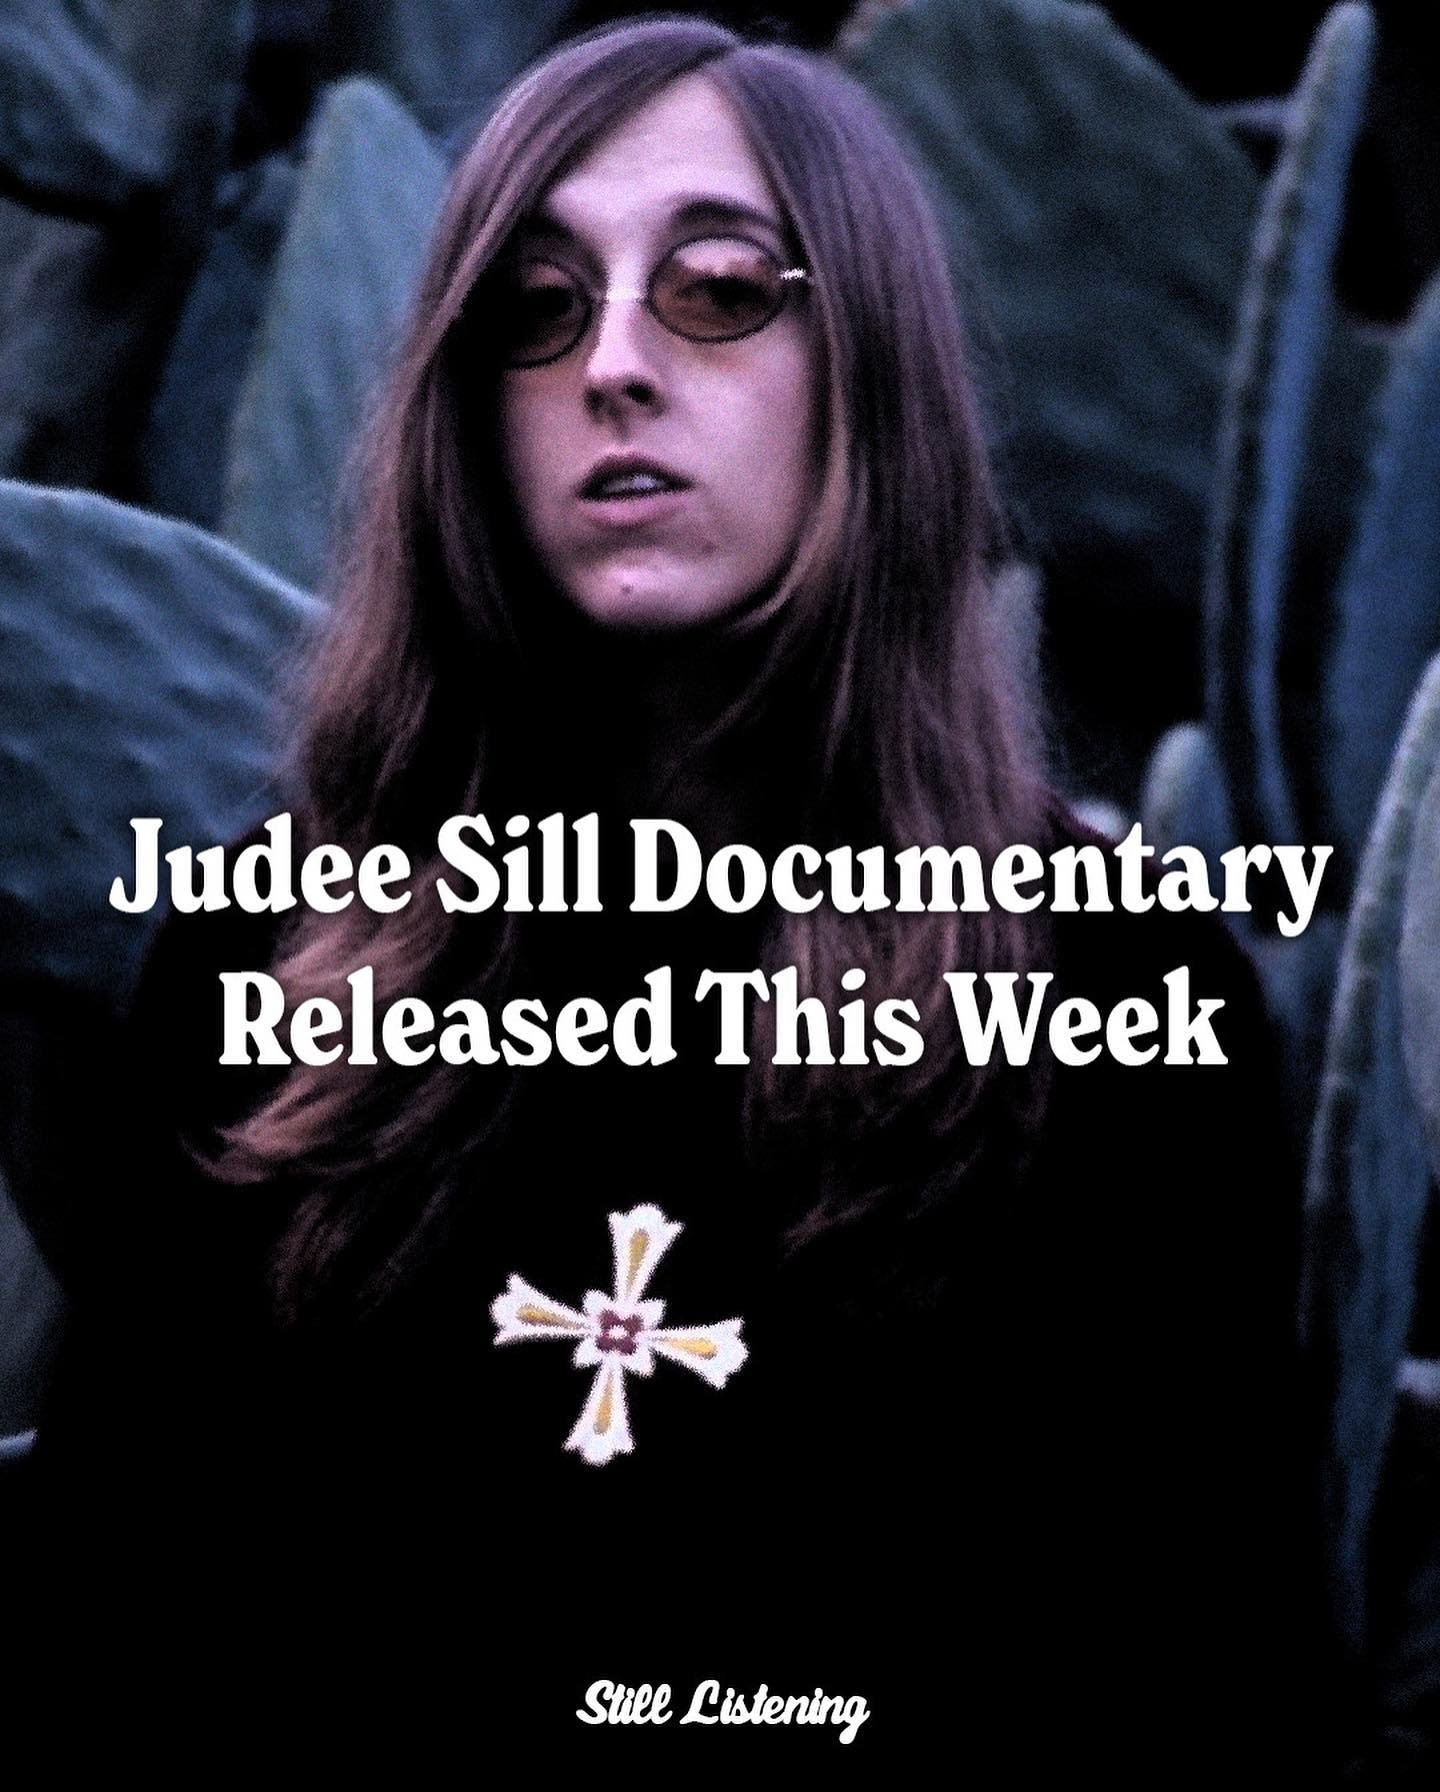 The never-before-told story of folk-rock icon Judee Sill, who in just two years went from living in a car to appearing on the cover of Rolling Stone. The documentary charts her troubled adolescence through her meteoric rise in the music world and her